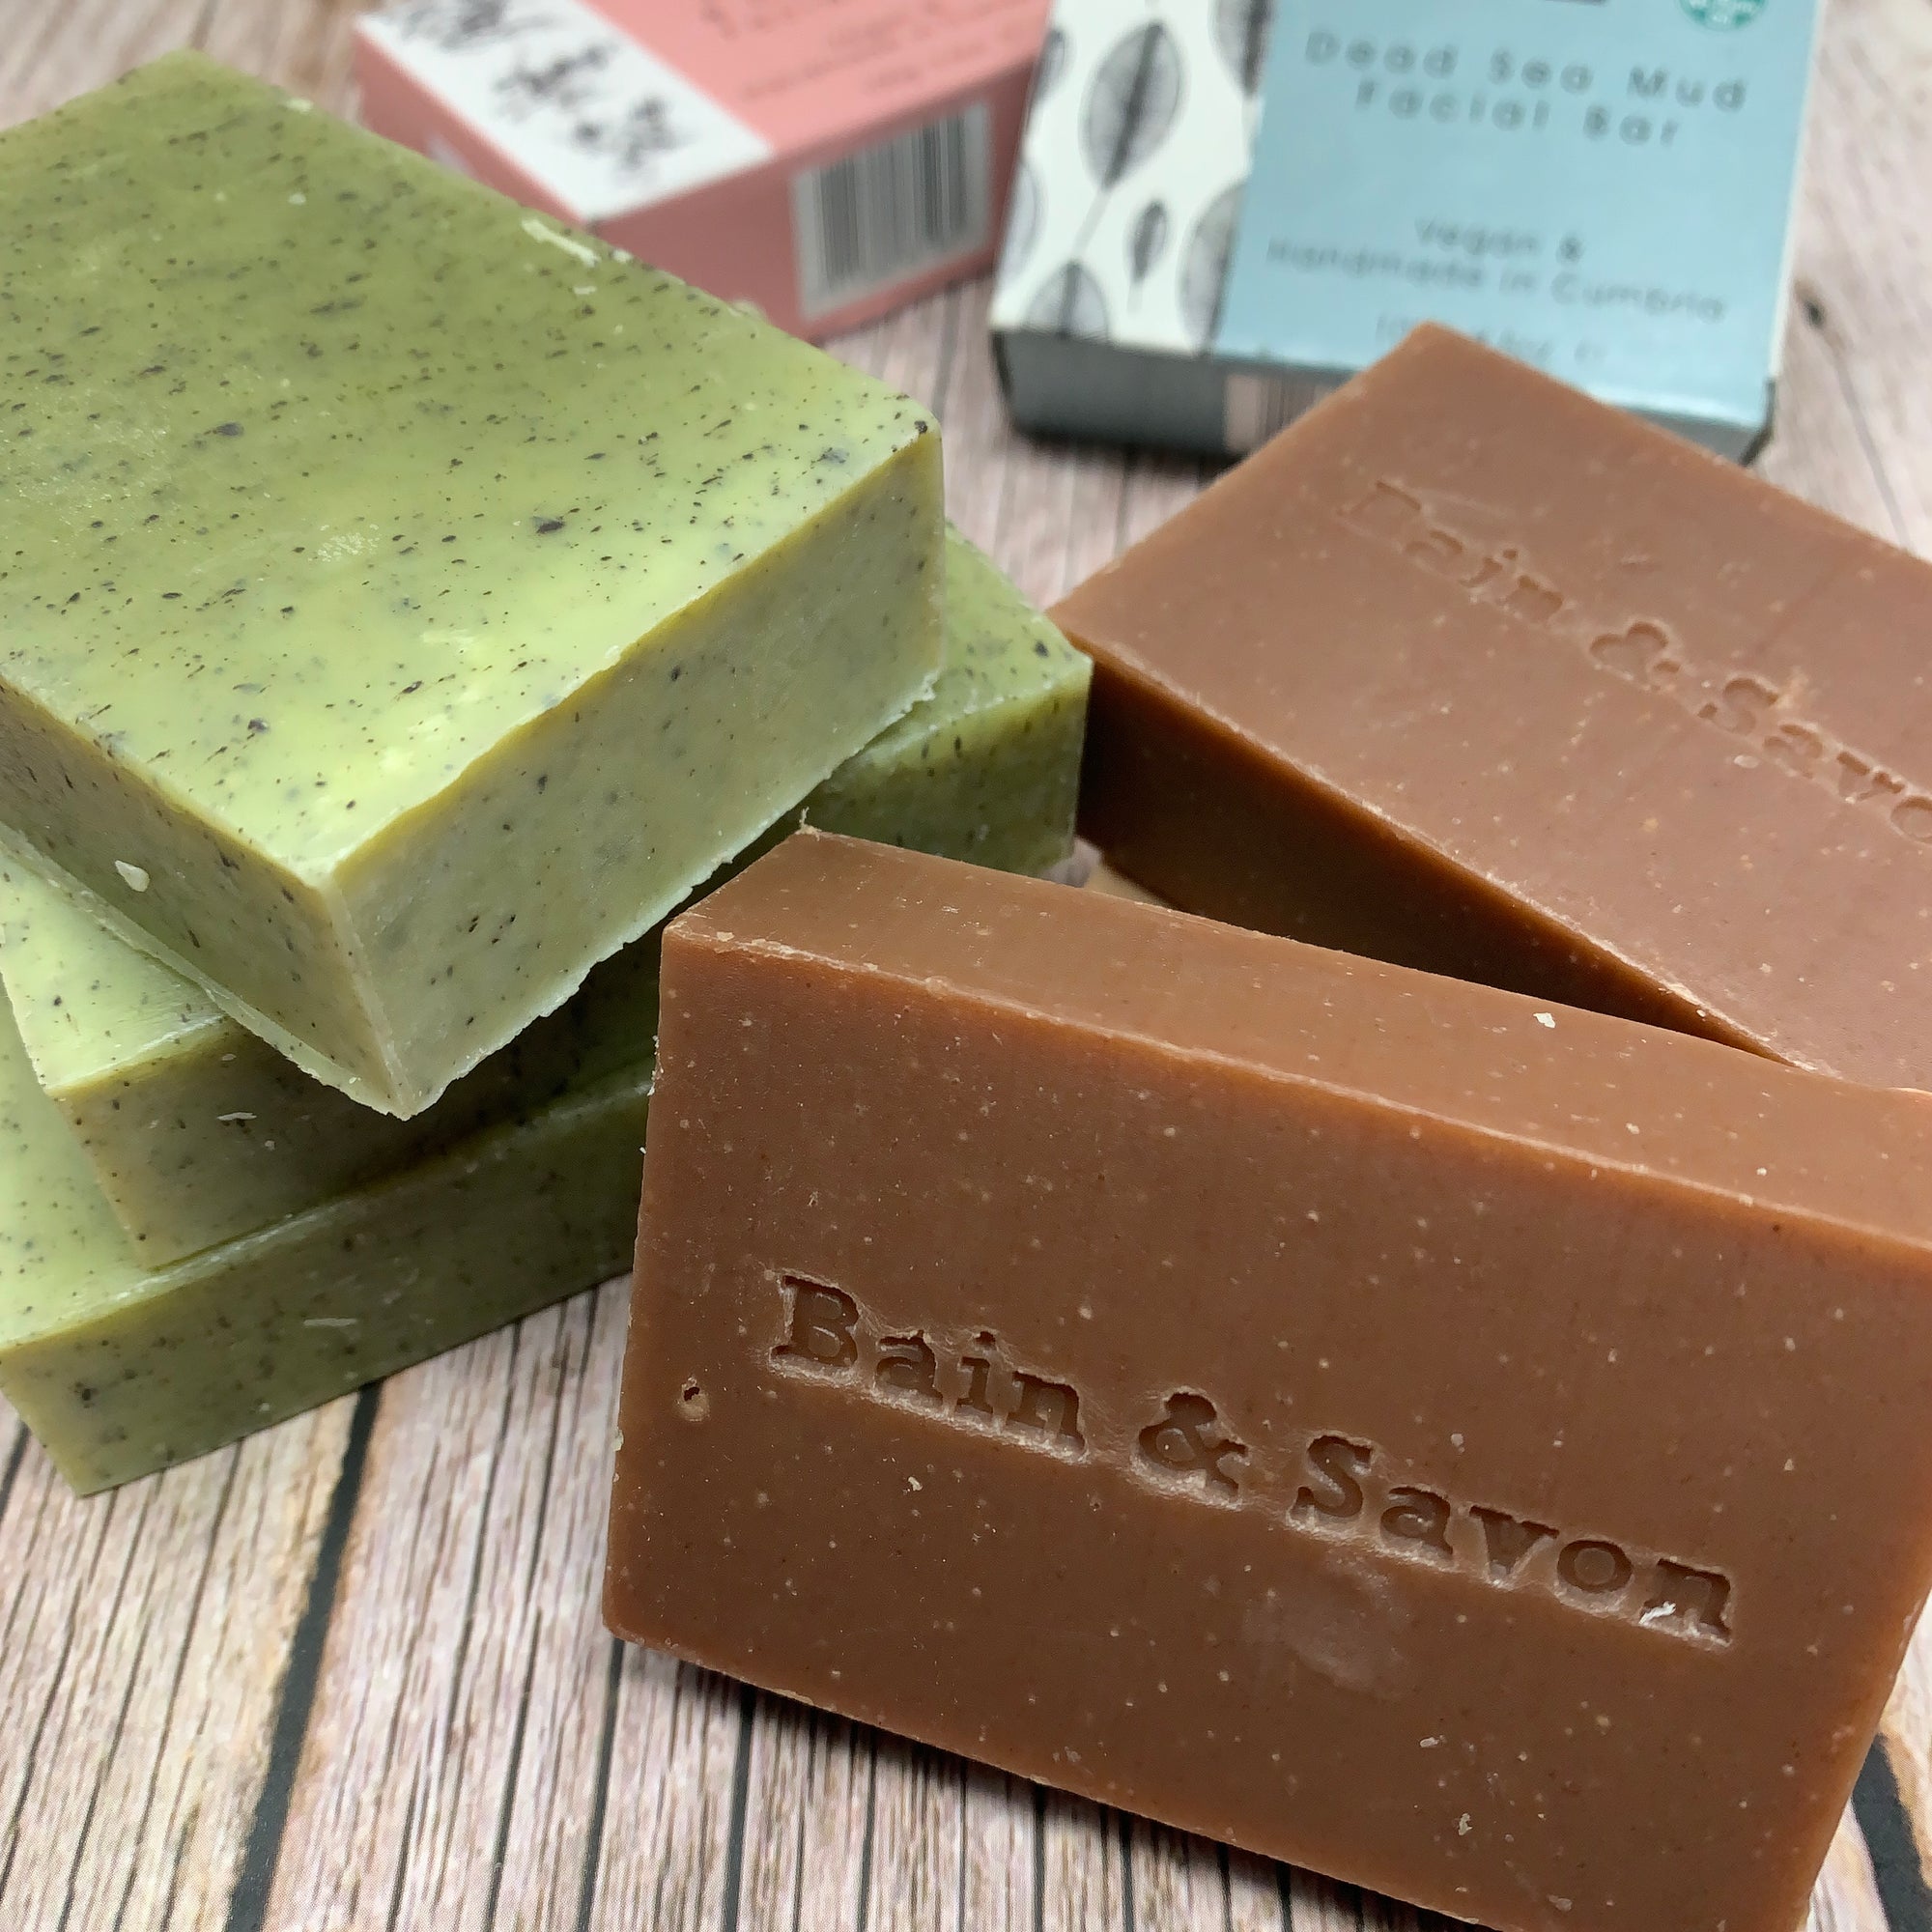 green and brown facial soap bars with bain & savon logo on one of the soaps